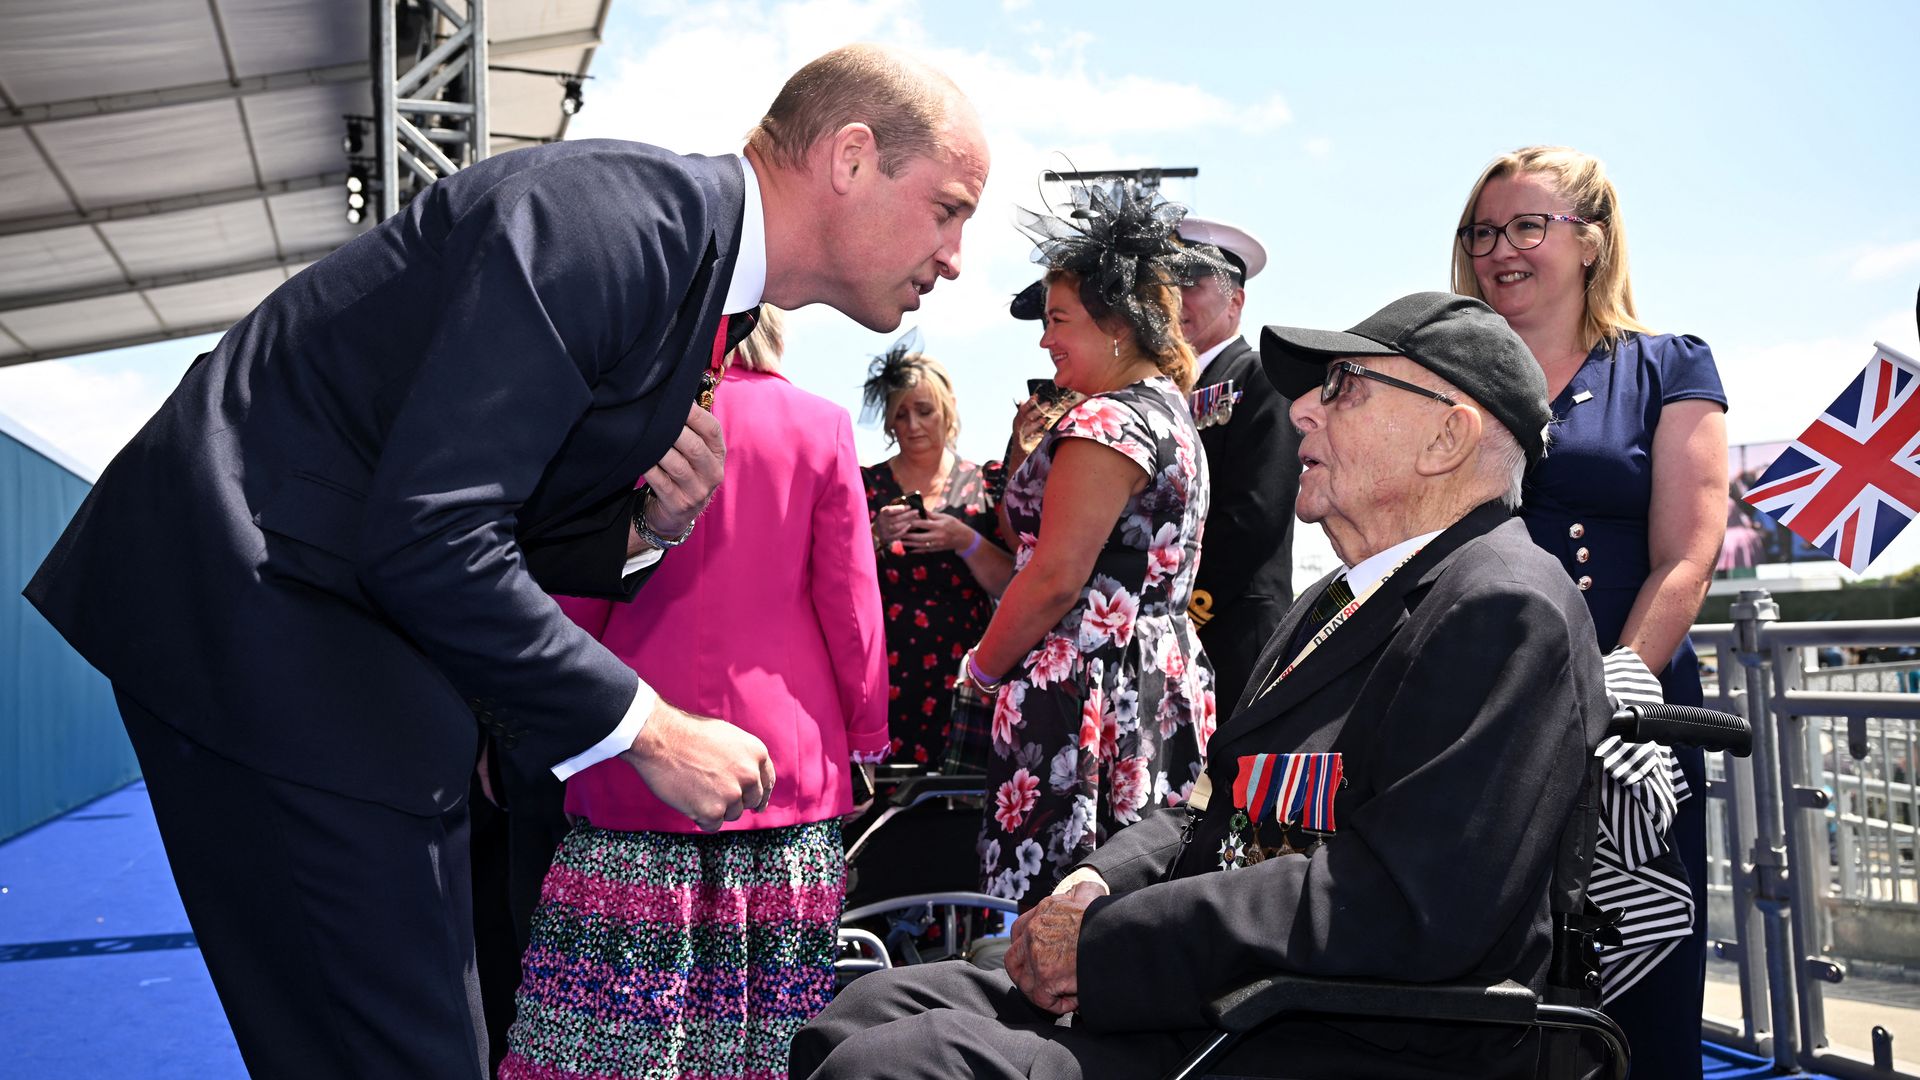 Prince William greets D-Day veteran Roy Hayward, following the UK's national commemorative event to mark the 80th anniversary commemorations of the Allied amphibious landing